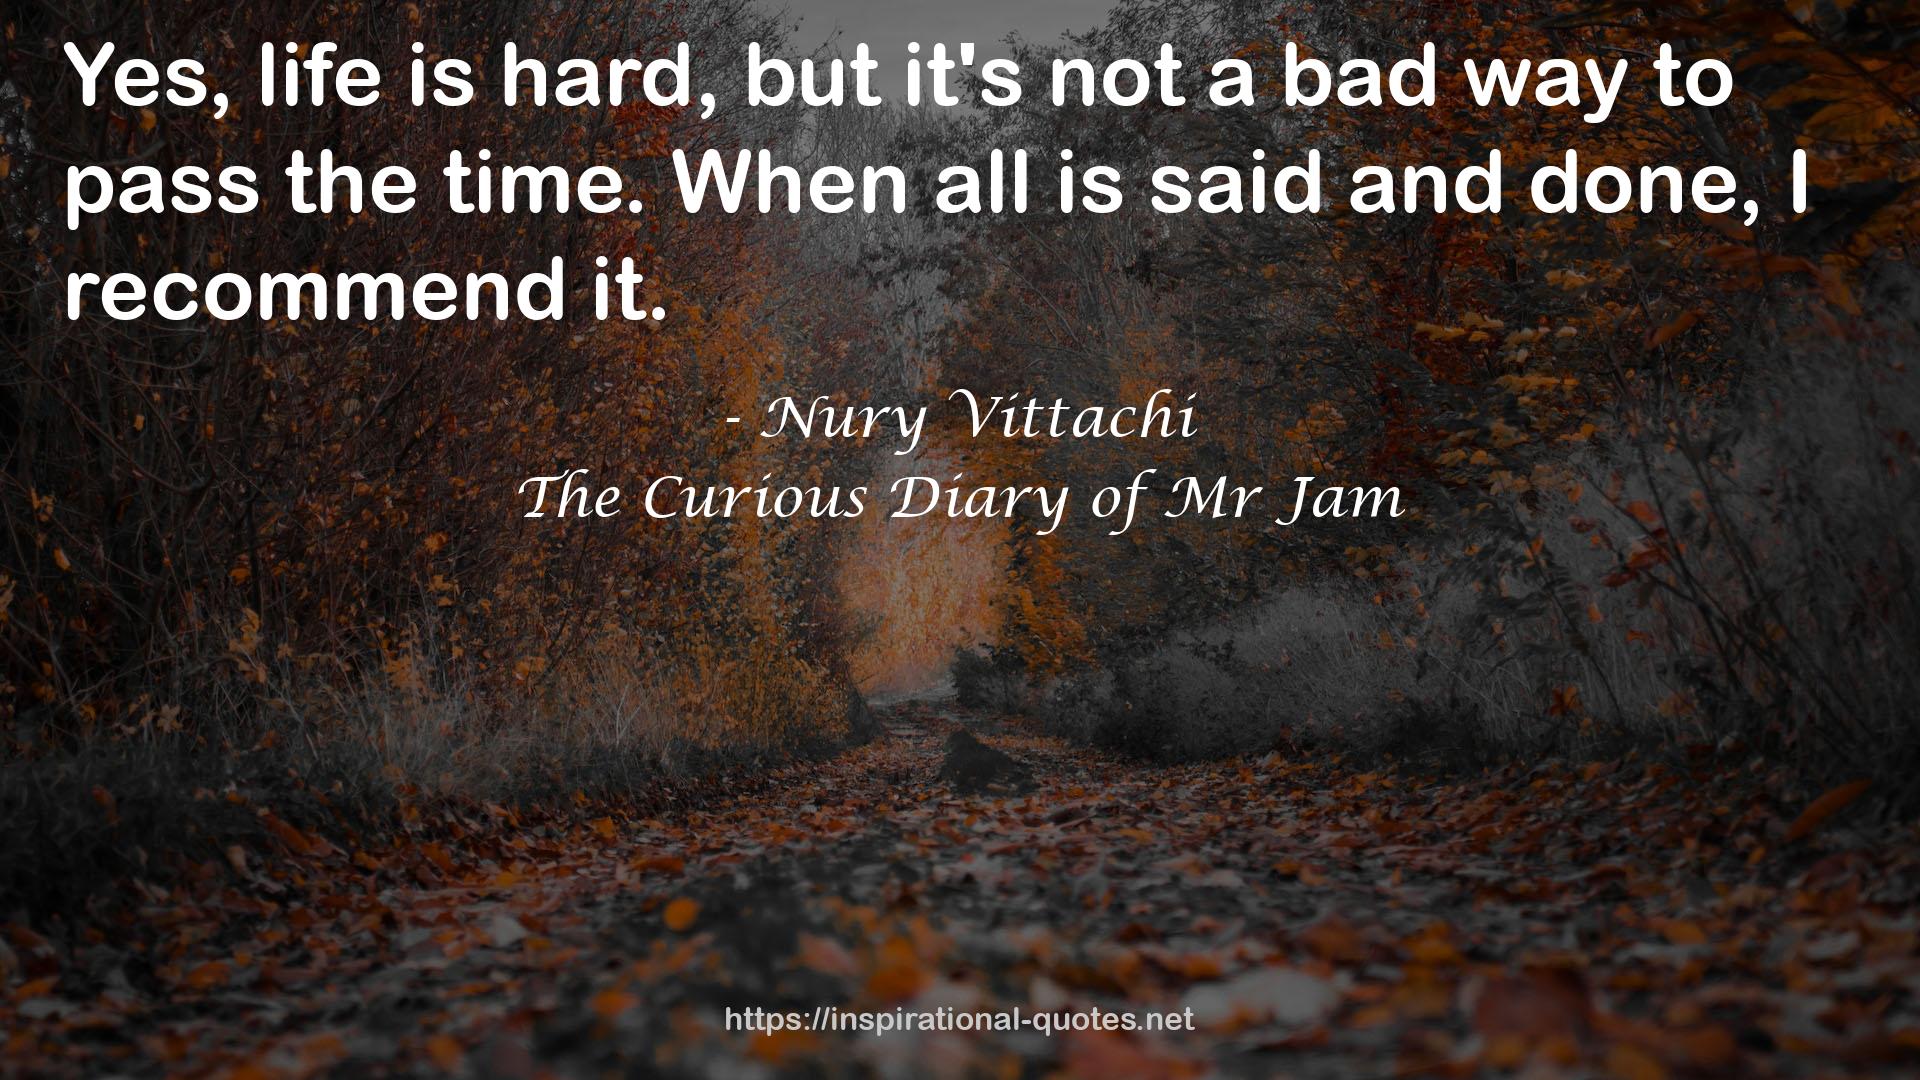 The Curious Diary of Mr Jam QUOTES